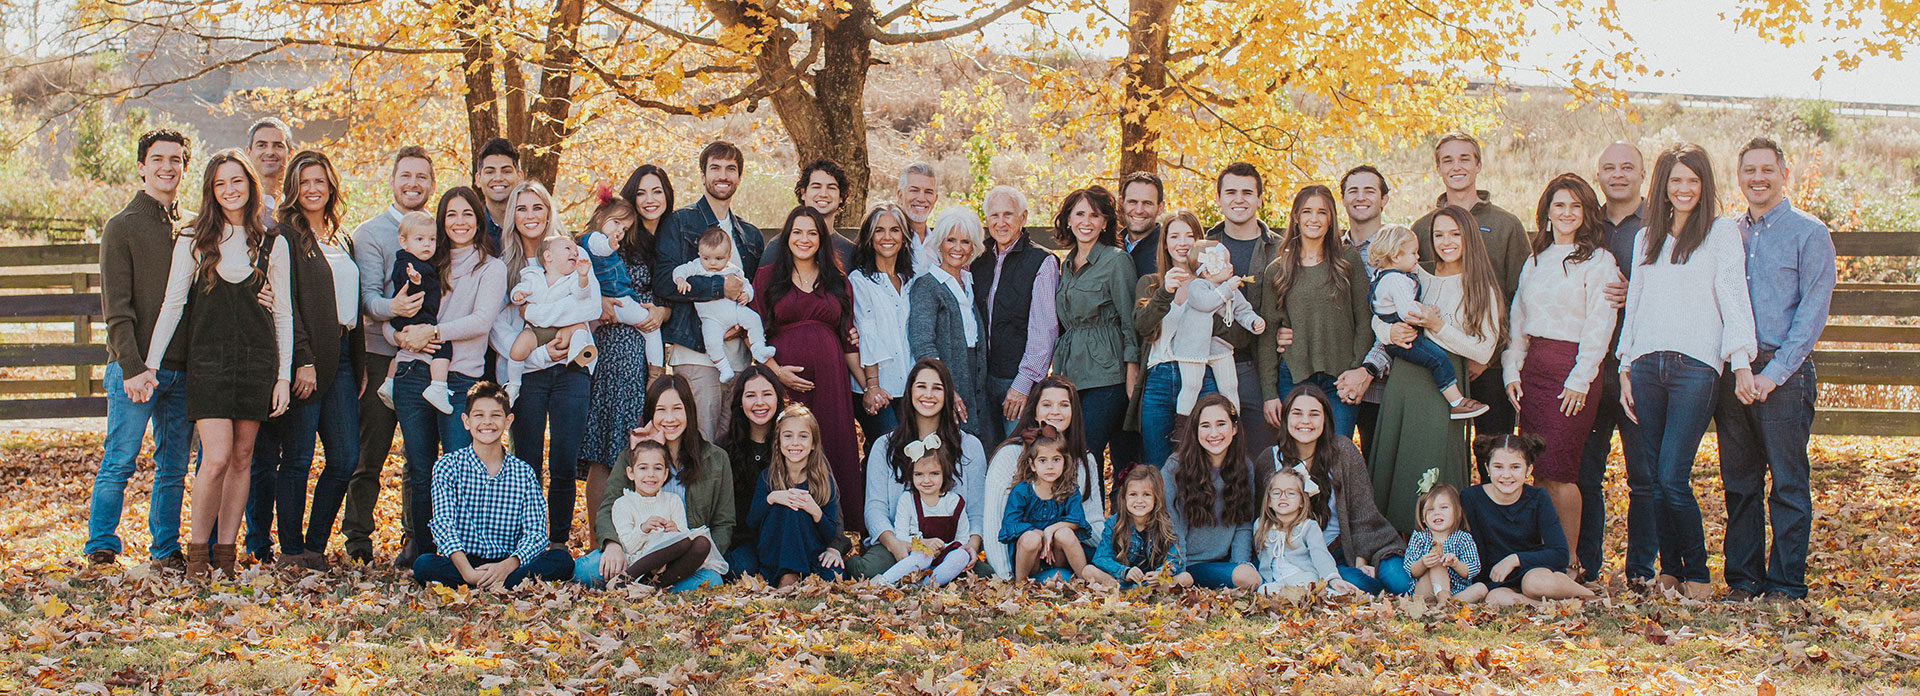 Meet the Remnant – Families